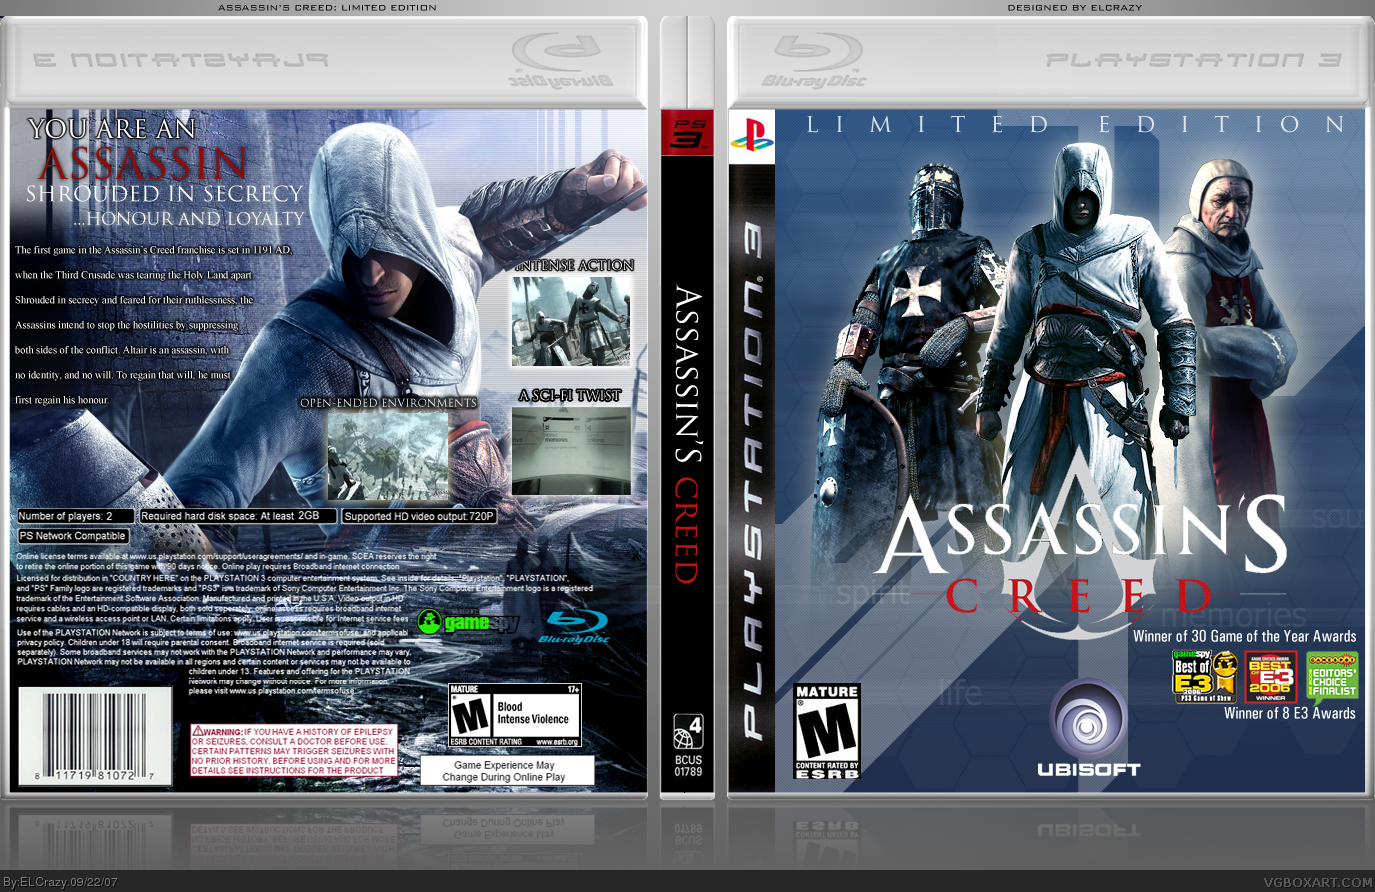 Assassin's Creed Limited Edition box cover